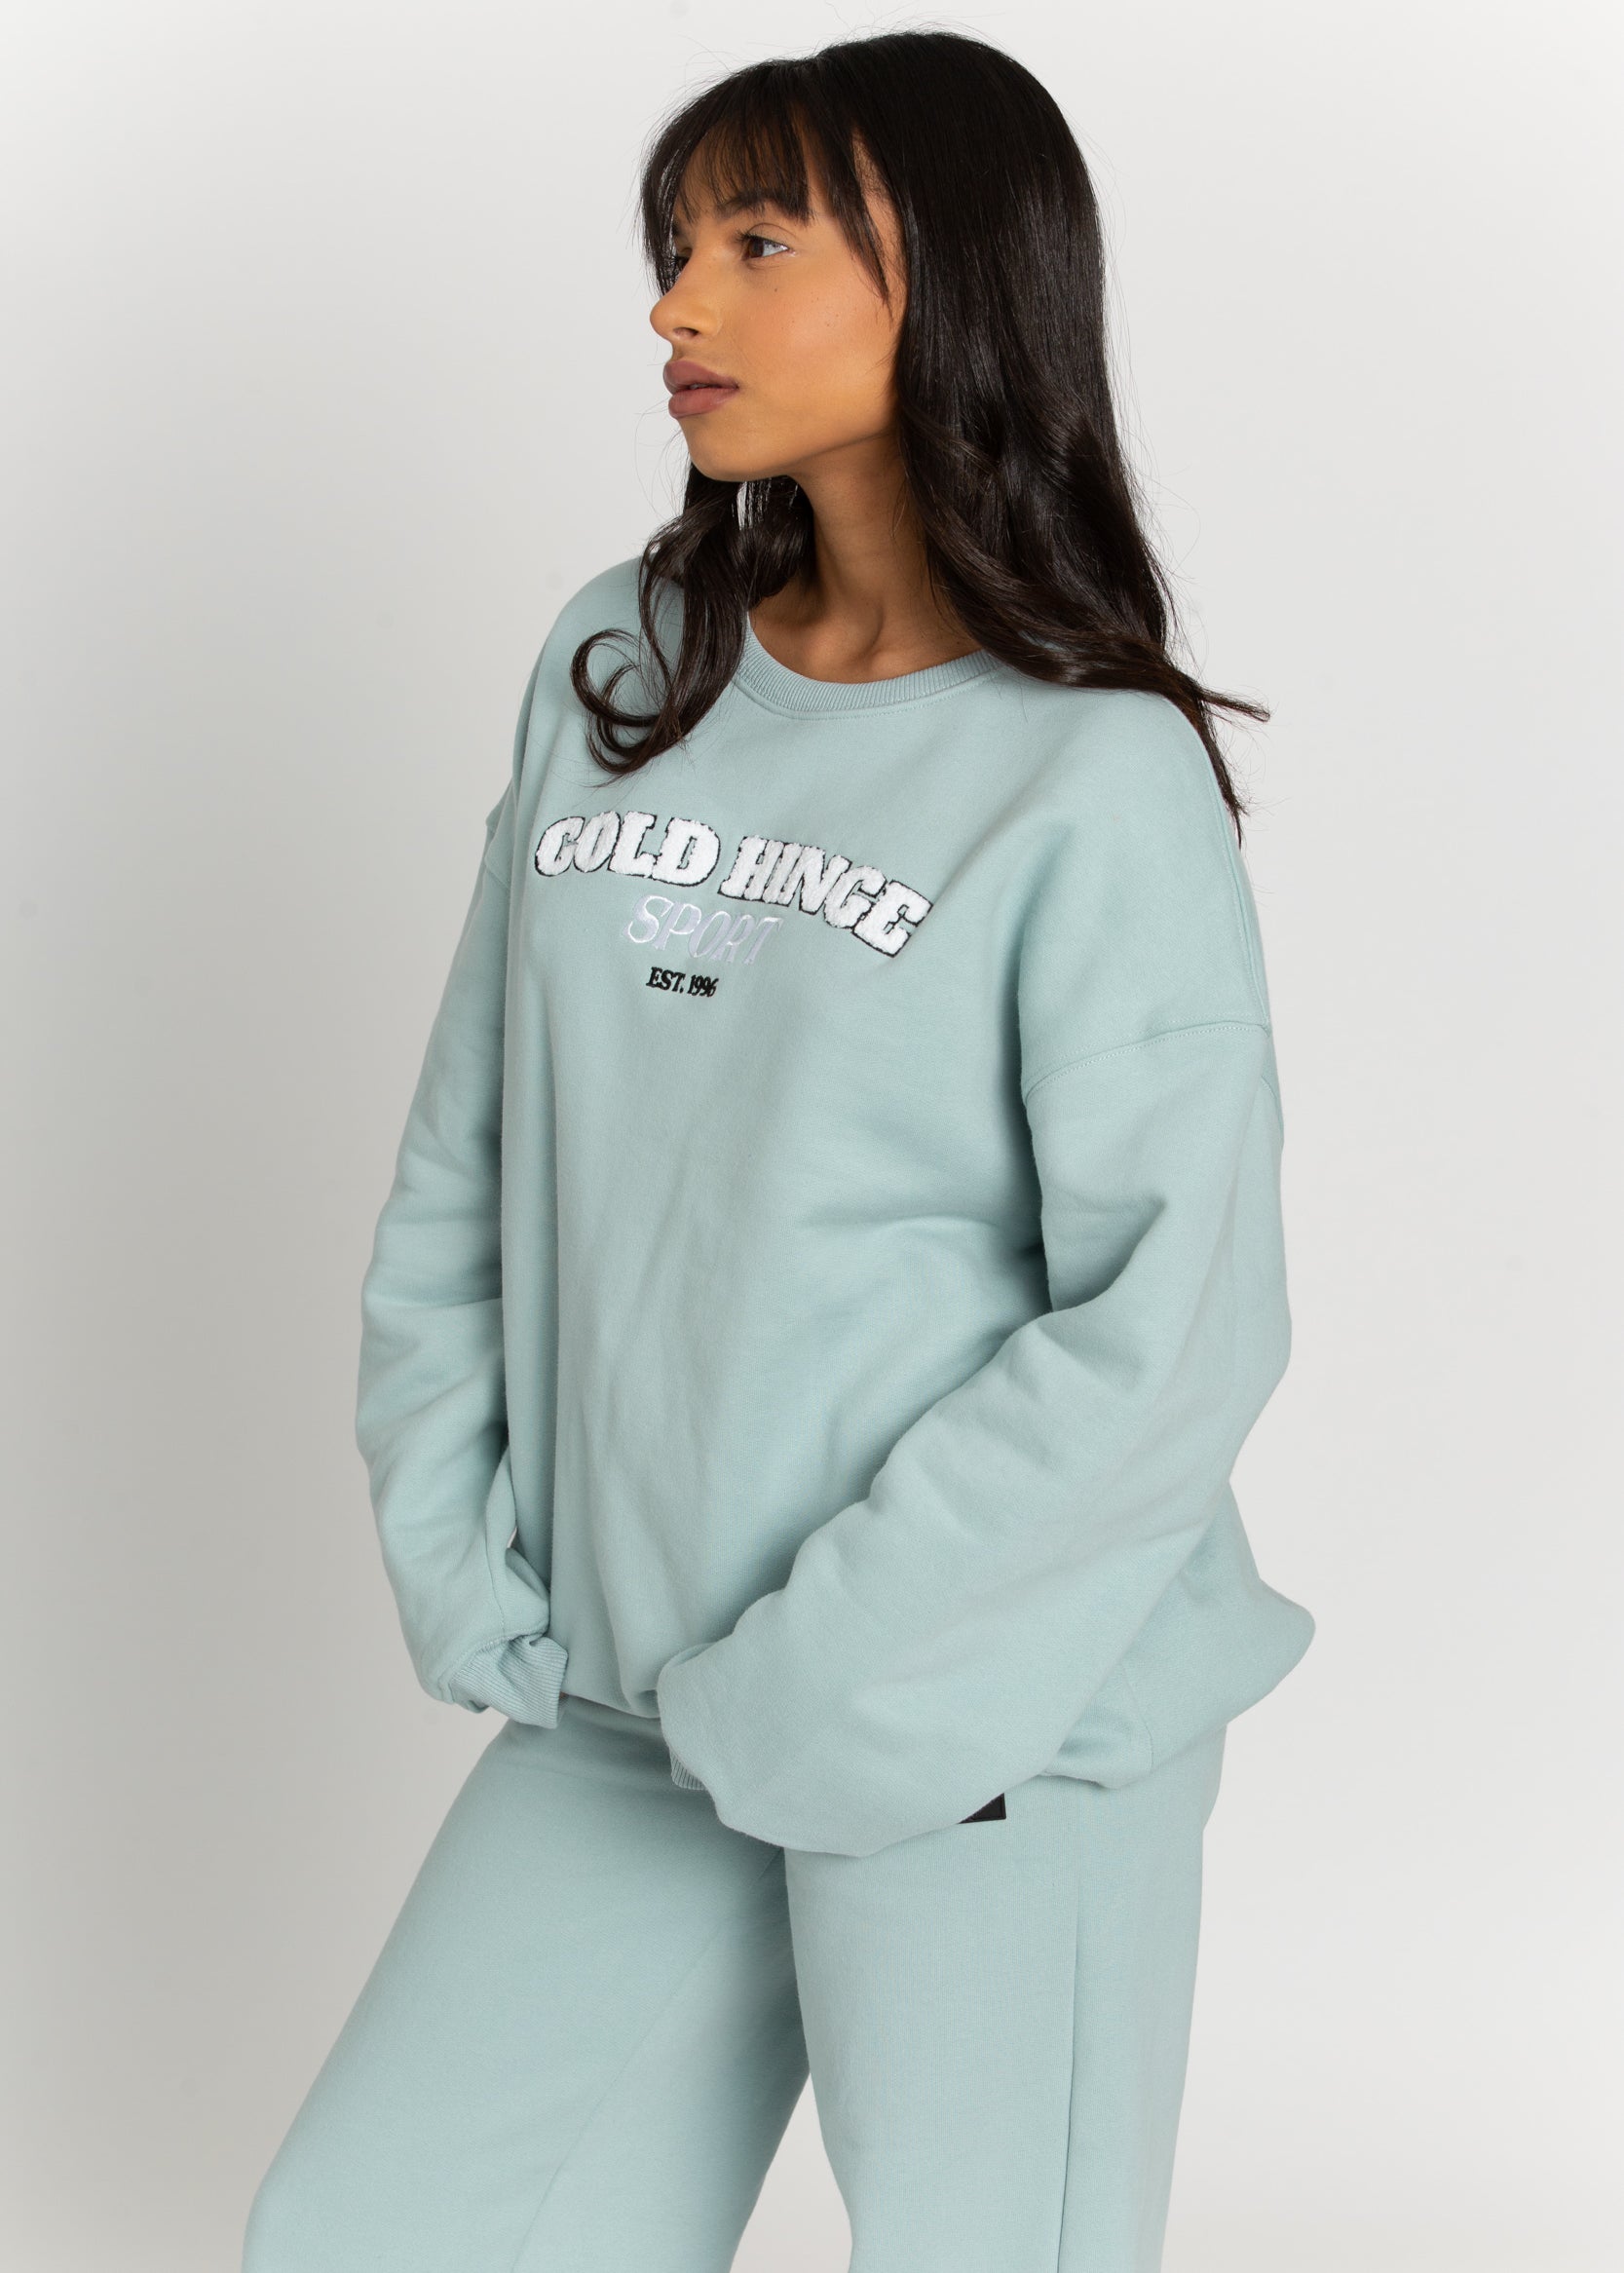 Upgrade your wardrobe with the Iceberg GH Sport Sweatshirt. This cozy piece features fuzzy 3D letters on the front and can be layered with a bold jacket and beanie for chilly weather, or paired with a tennis skirt for the warmer months. Complete the look with the matching sweatpants for a cohesive style.